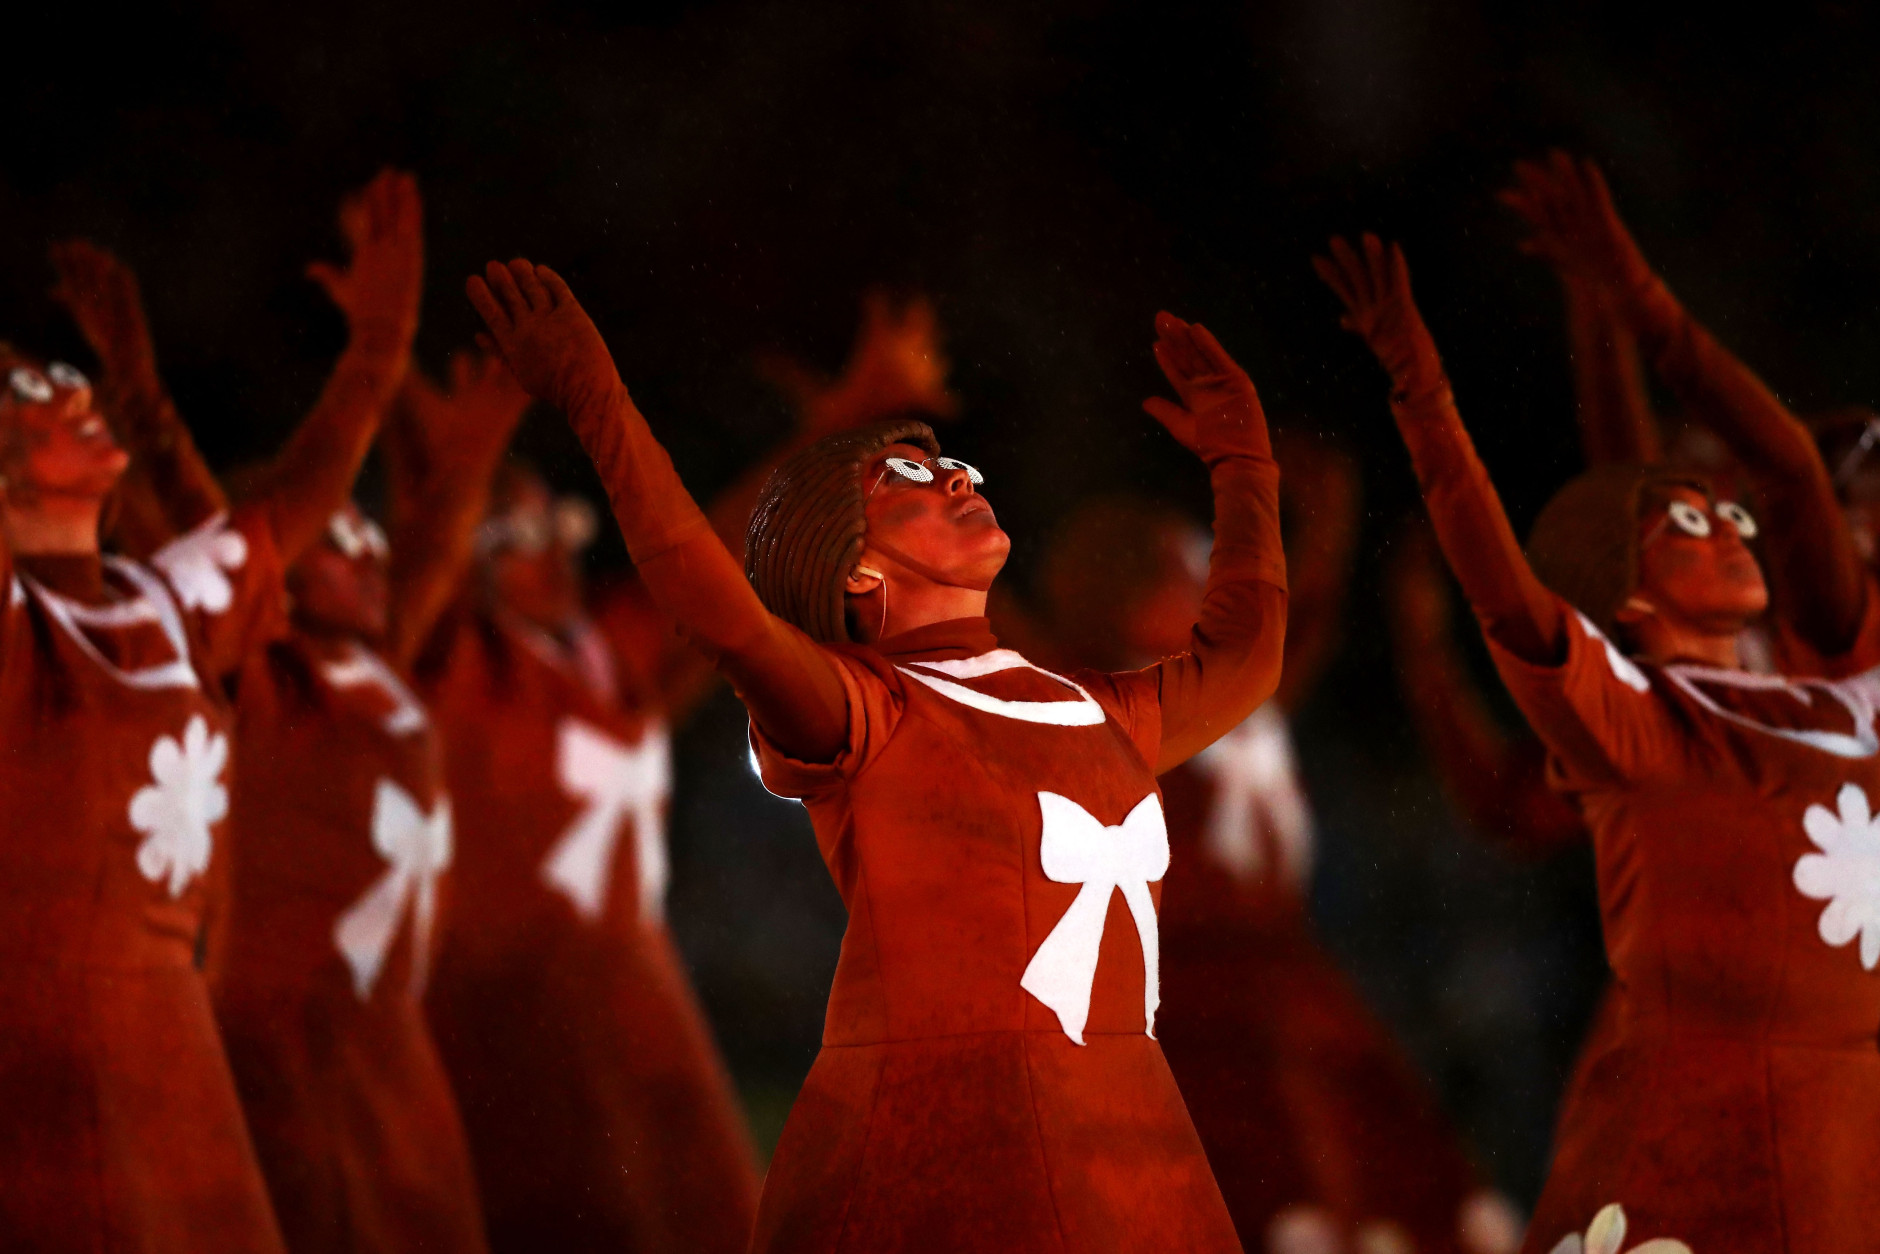 RIO DE JANEIRO, BRAZIL - AUGUST 21: Dancers perform during the Closing Ceremony on Day 16 of the Rio 2016 Olympic Games at Maracana Stadium on August 21, 2016 in Rio de Janeiro, Brazil.  (Photo by Ezra Shaw/Getty Images)